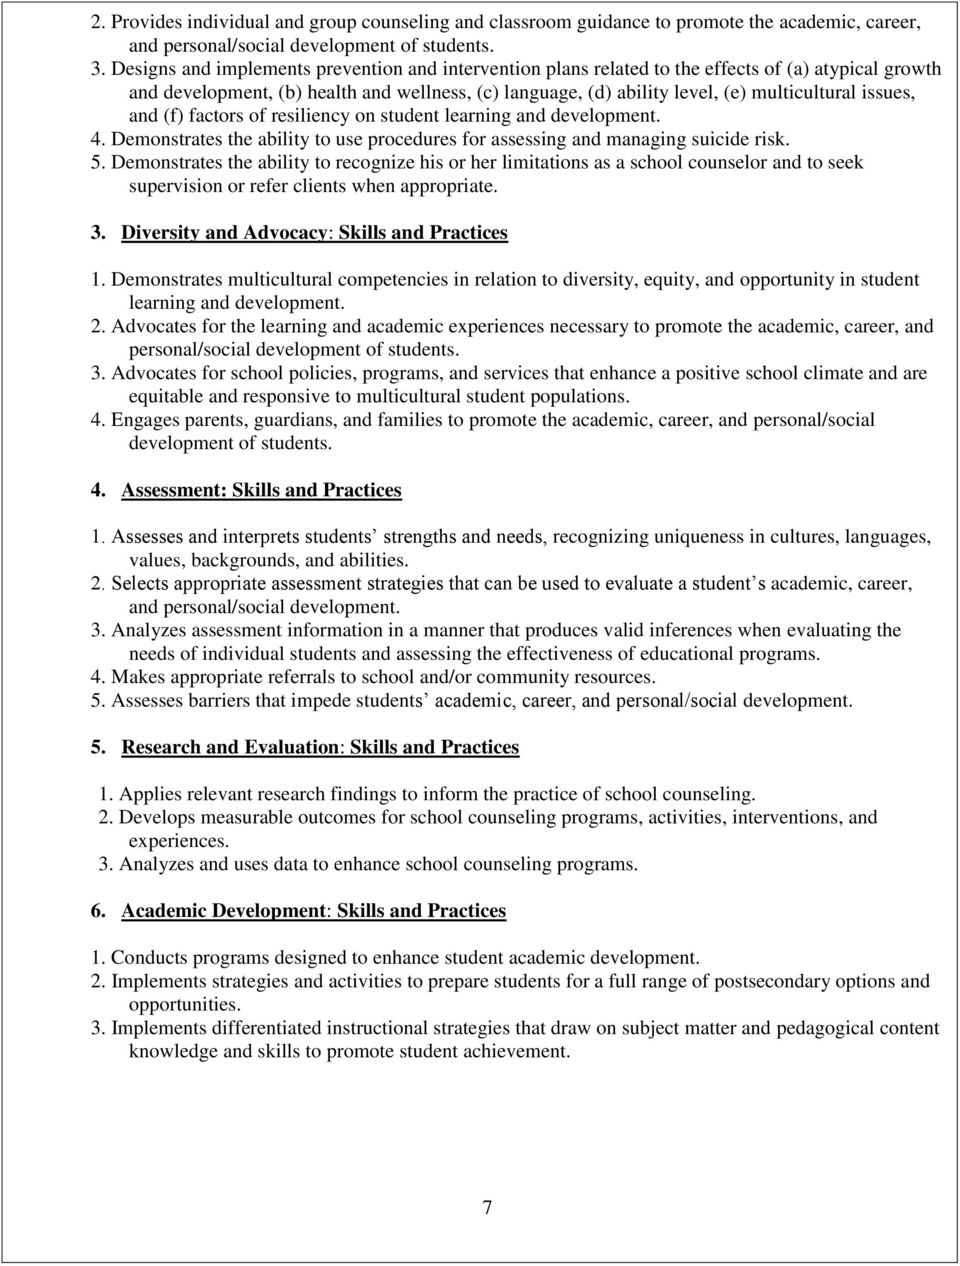 issues, and (f) factors of resiliency on student learning and development. 4. Demonstrates the ability to use procedures for assessing and managing suicide risk. 5.